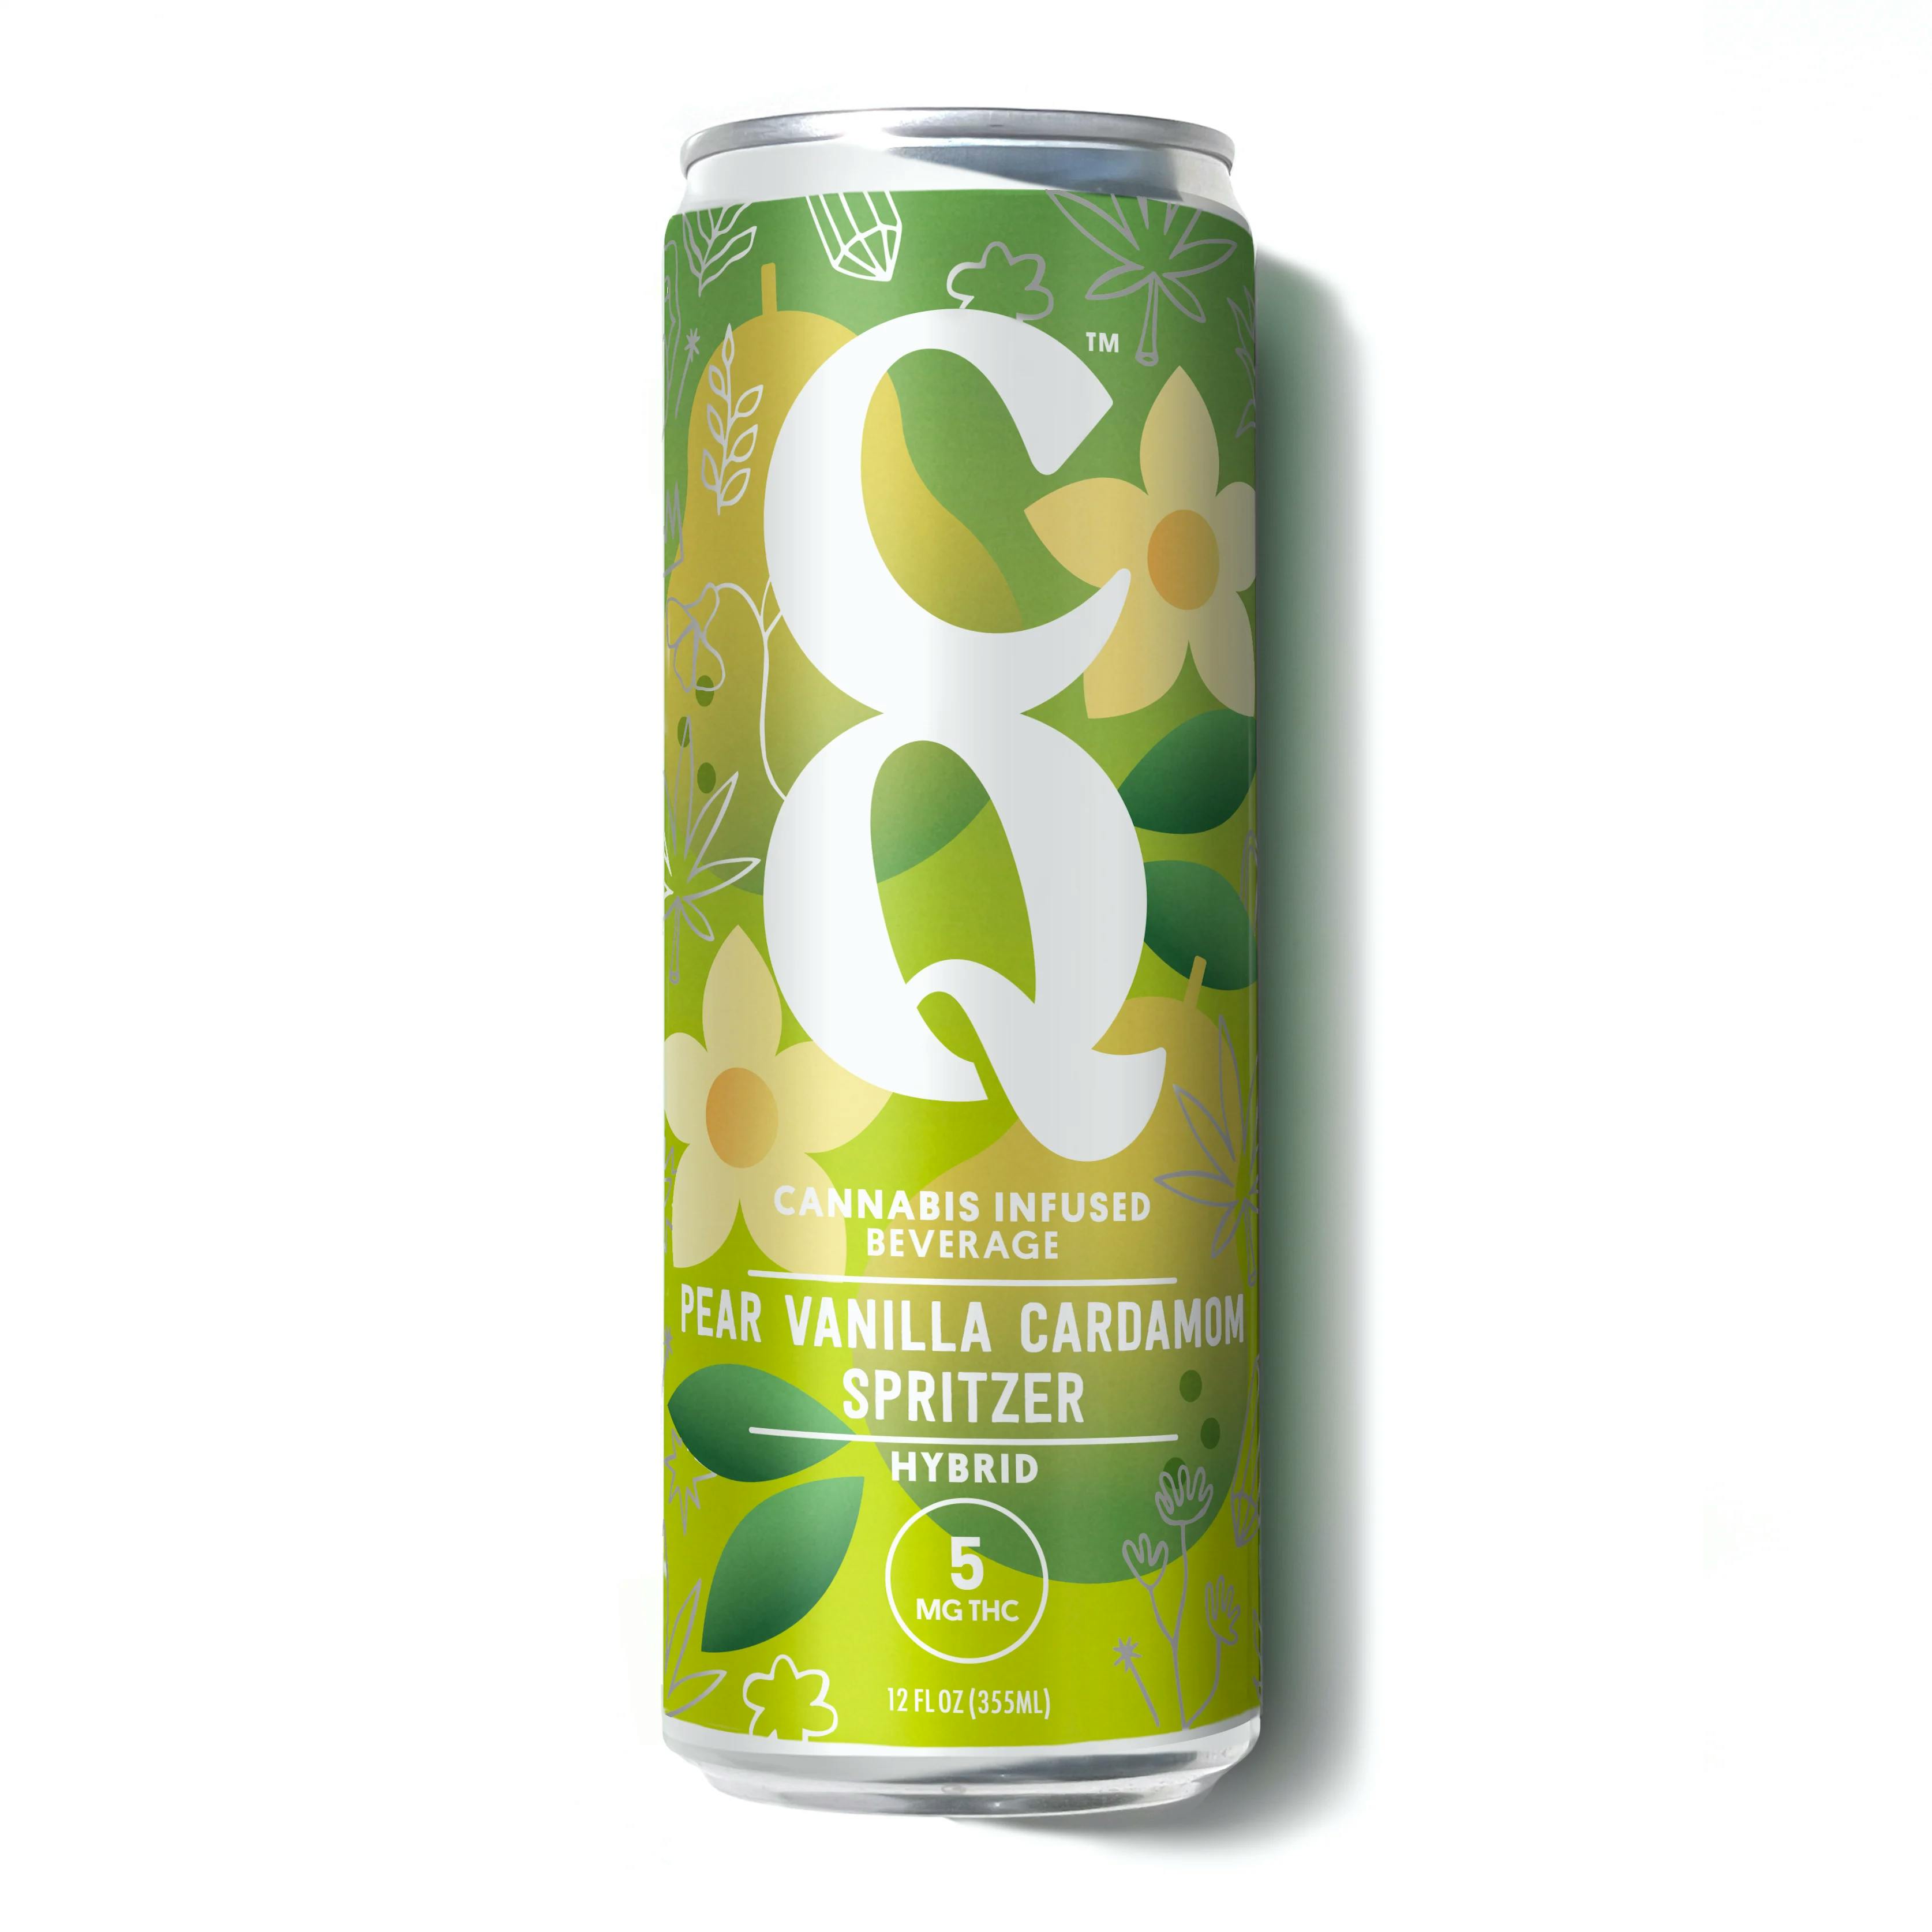 Buy XS Energy Drink Mojito 250 ml x 4 Cans